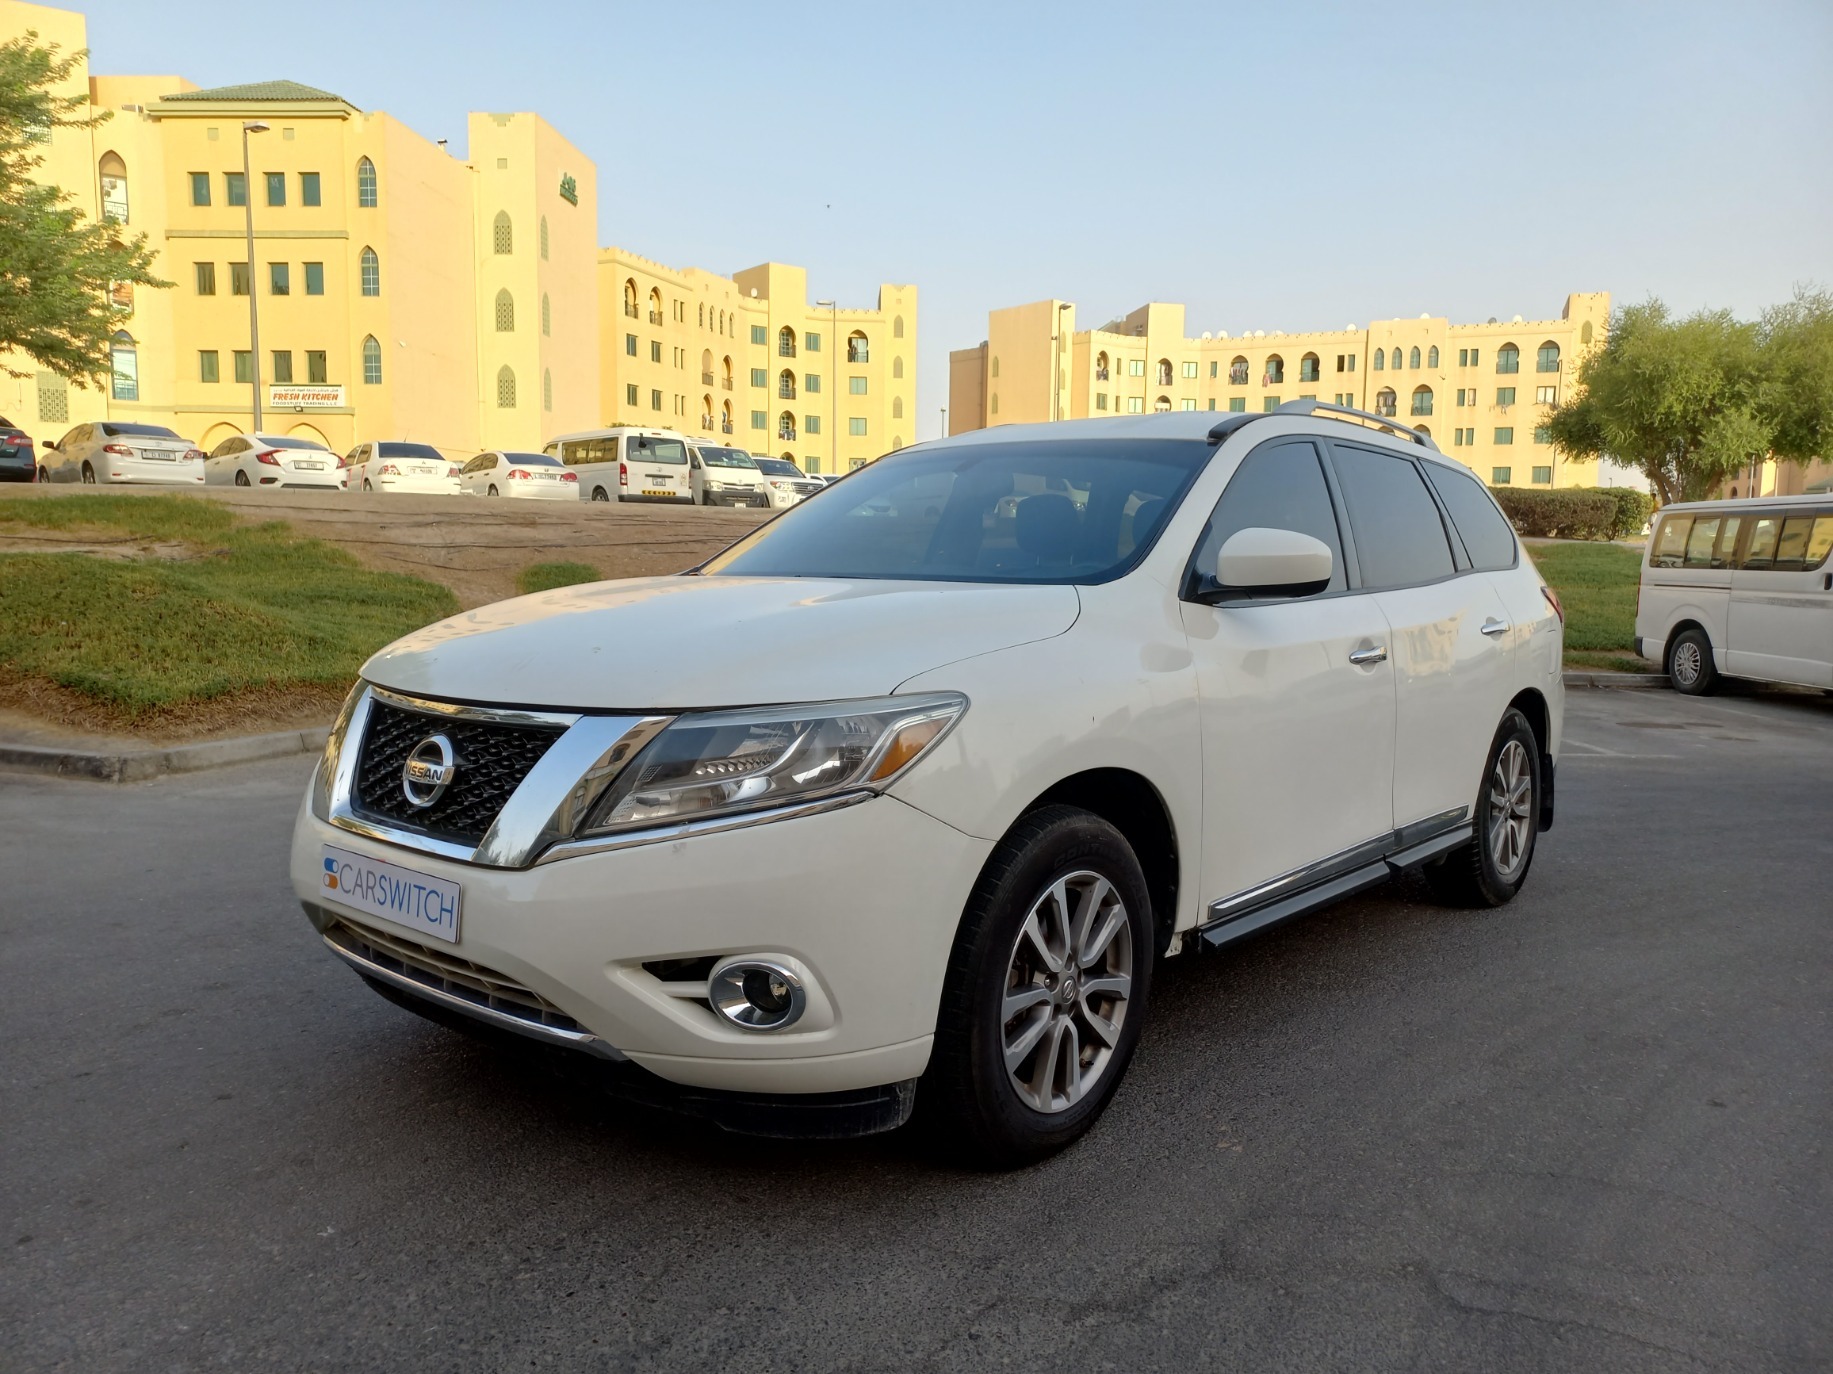 Used Nissan Pathfinder 2015 Price in UAE, Specs and Reviews for Dubai